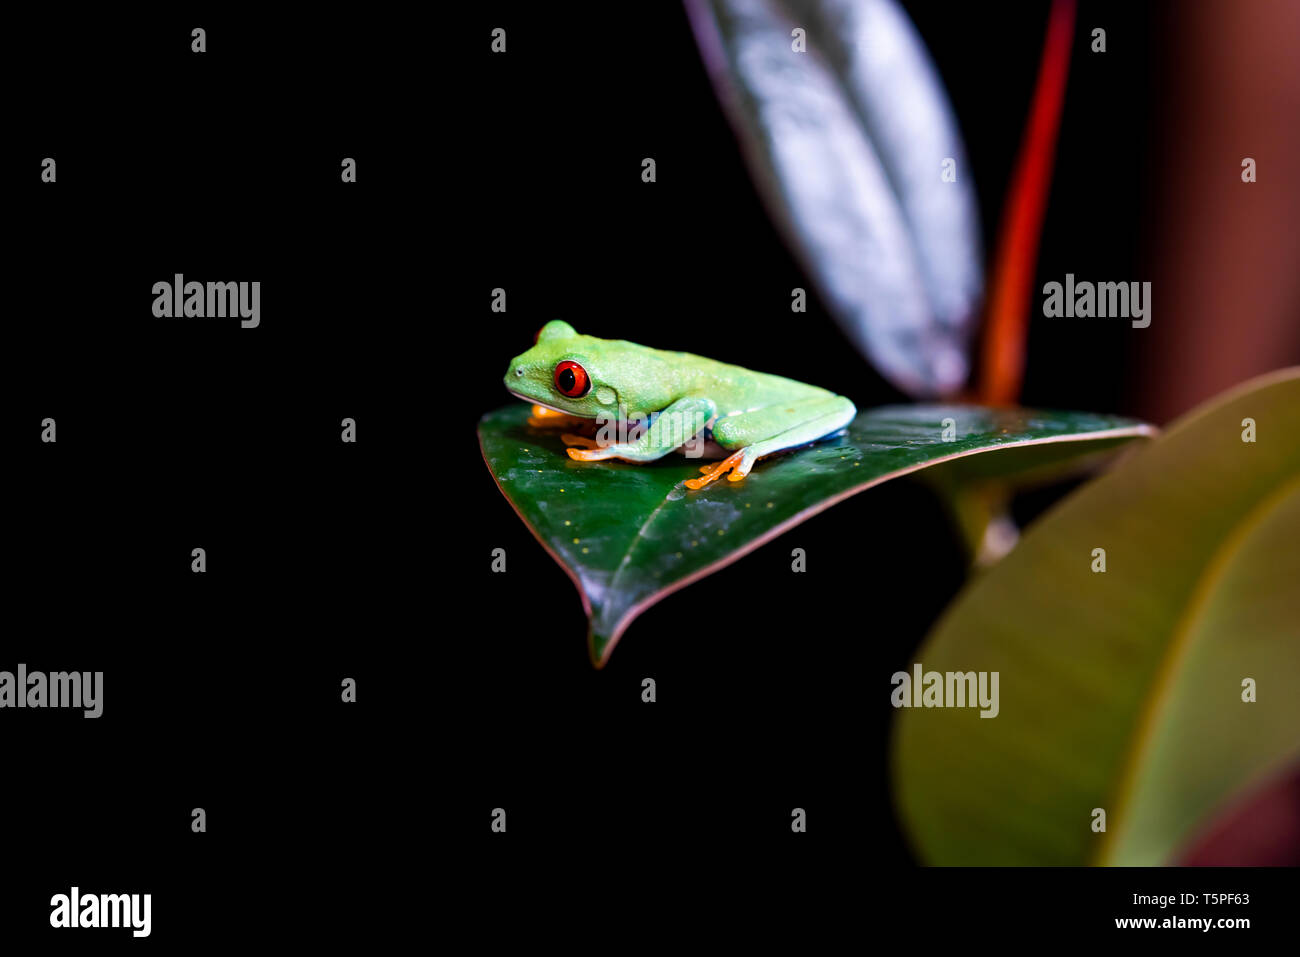 Red-eyed tree frog (Agalychnis callidryas) sitting on a leaf - closeup with selective focus. Black background Stock Photo